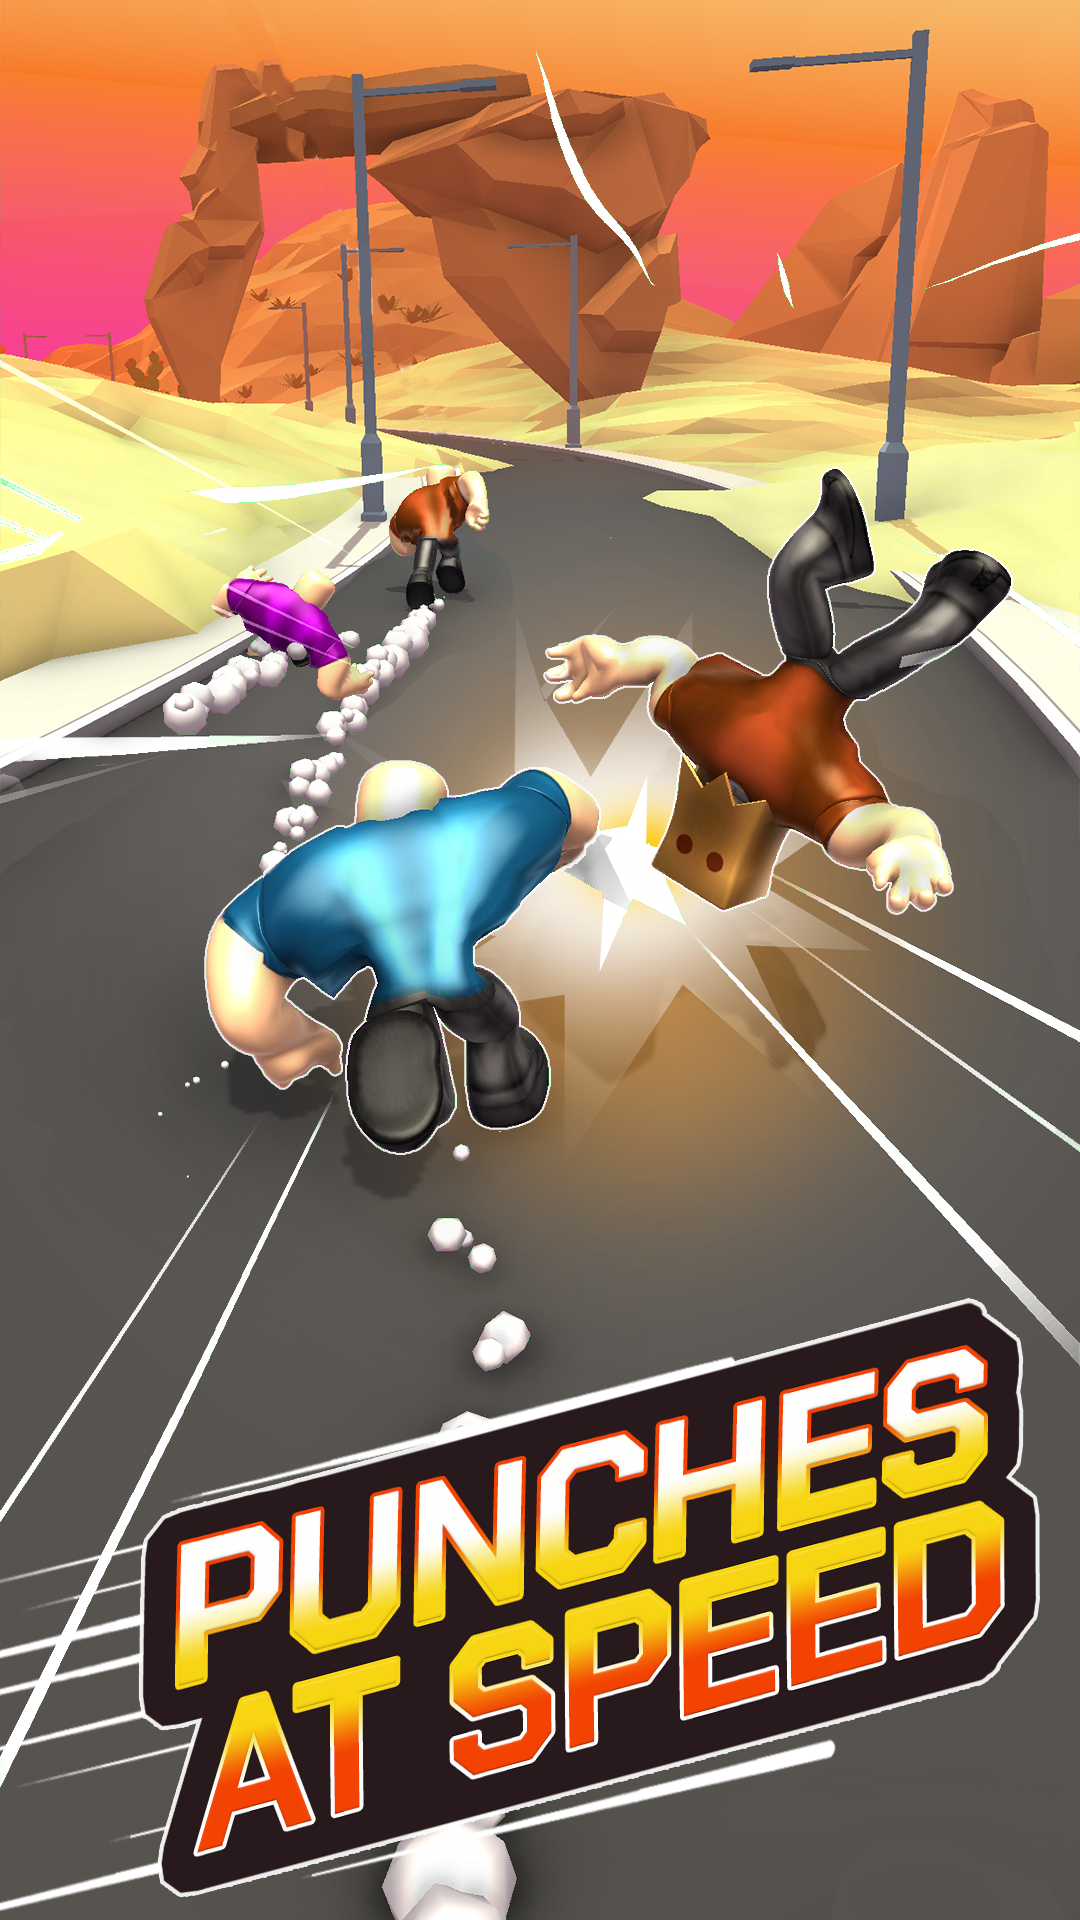 Speed Clicker APK for Android Download